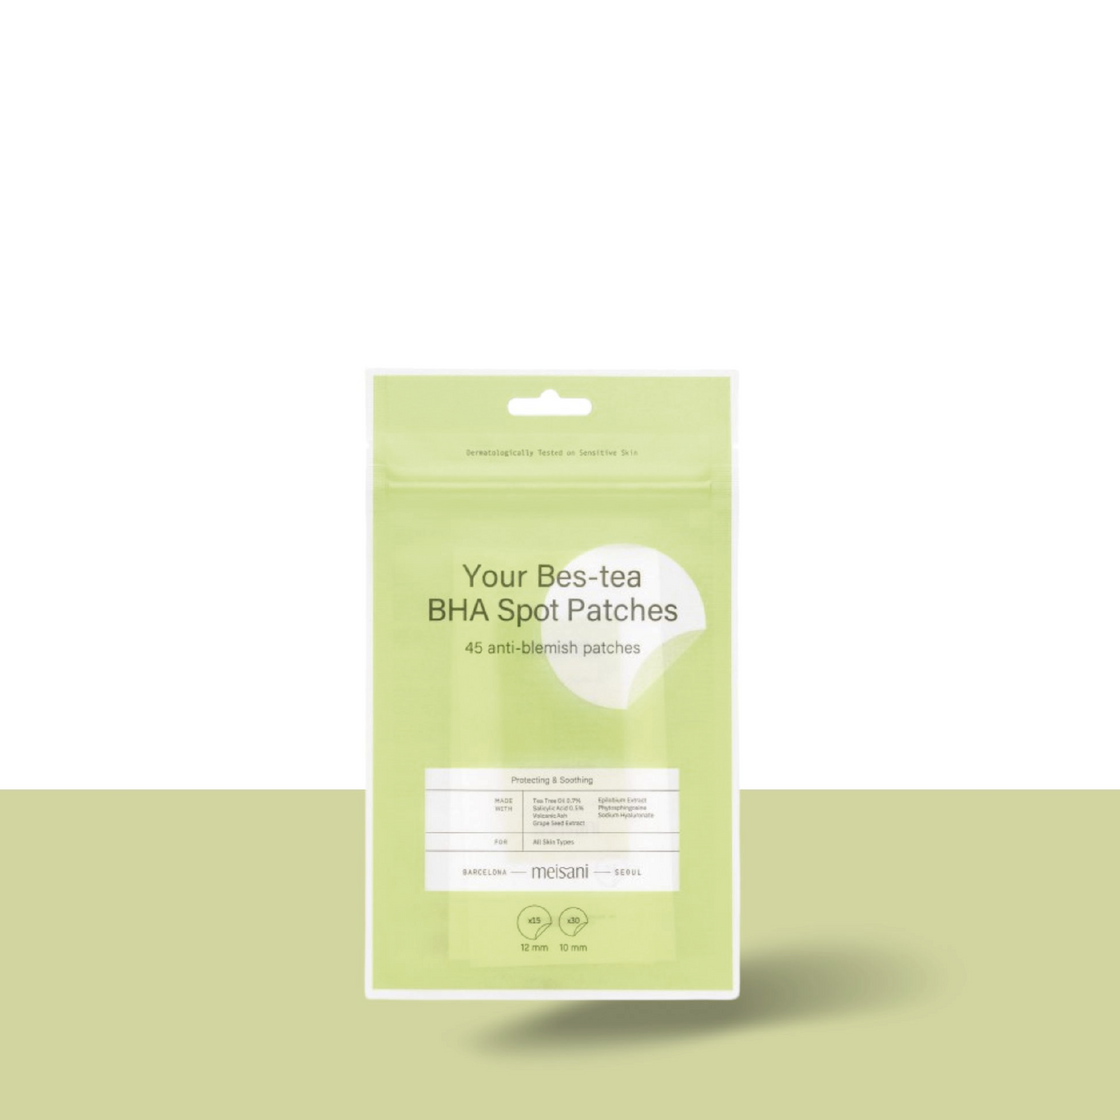 Meisani | Your Bes-Tea BHA Spot Patches